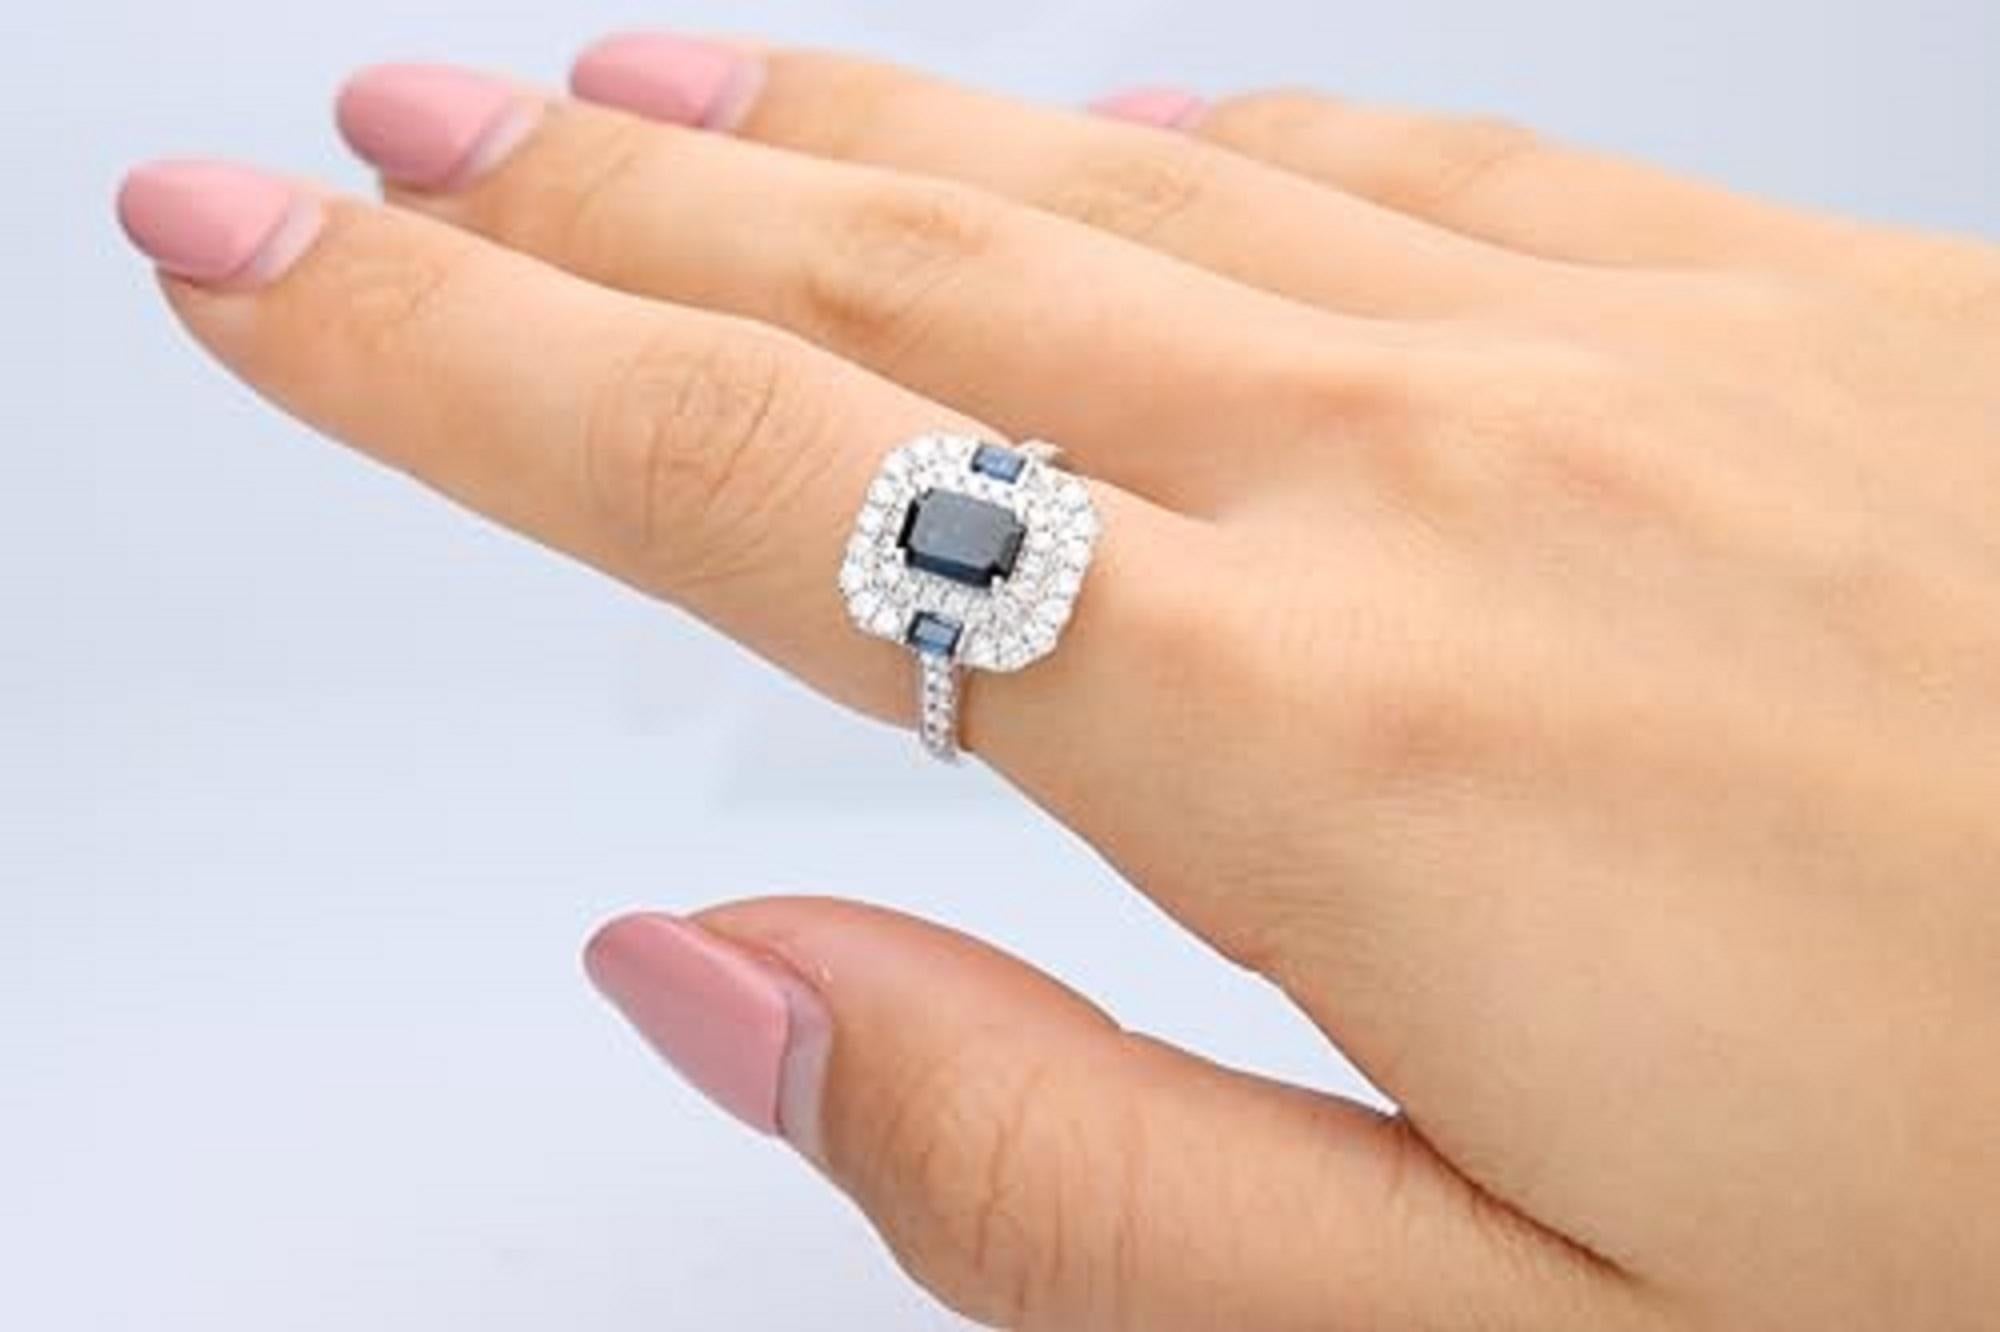 Decorate yourself in elegance with this Ring is crafted from 14-karat White Gold by Gin & Grace. This Ring is made up of 7x5 Emerald-Cut (1 pcs) 1.07 carat Blue Sapphire and 3.5x2 Baguette-cut (2 Pcs) 0.21 Carat Blue Sapphire and Round-cut White